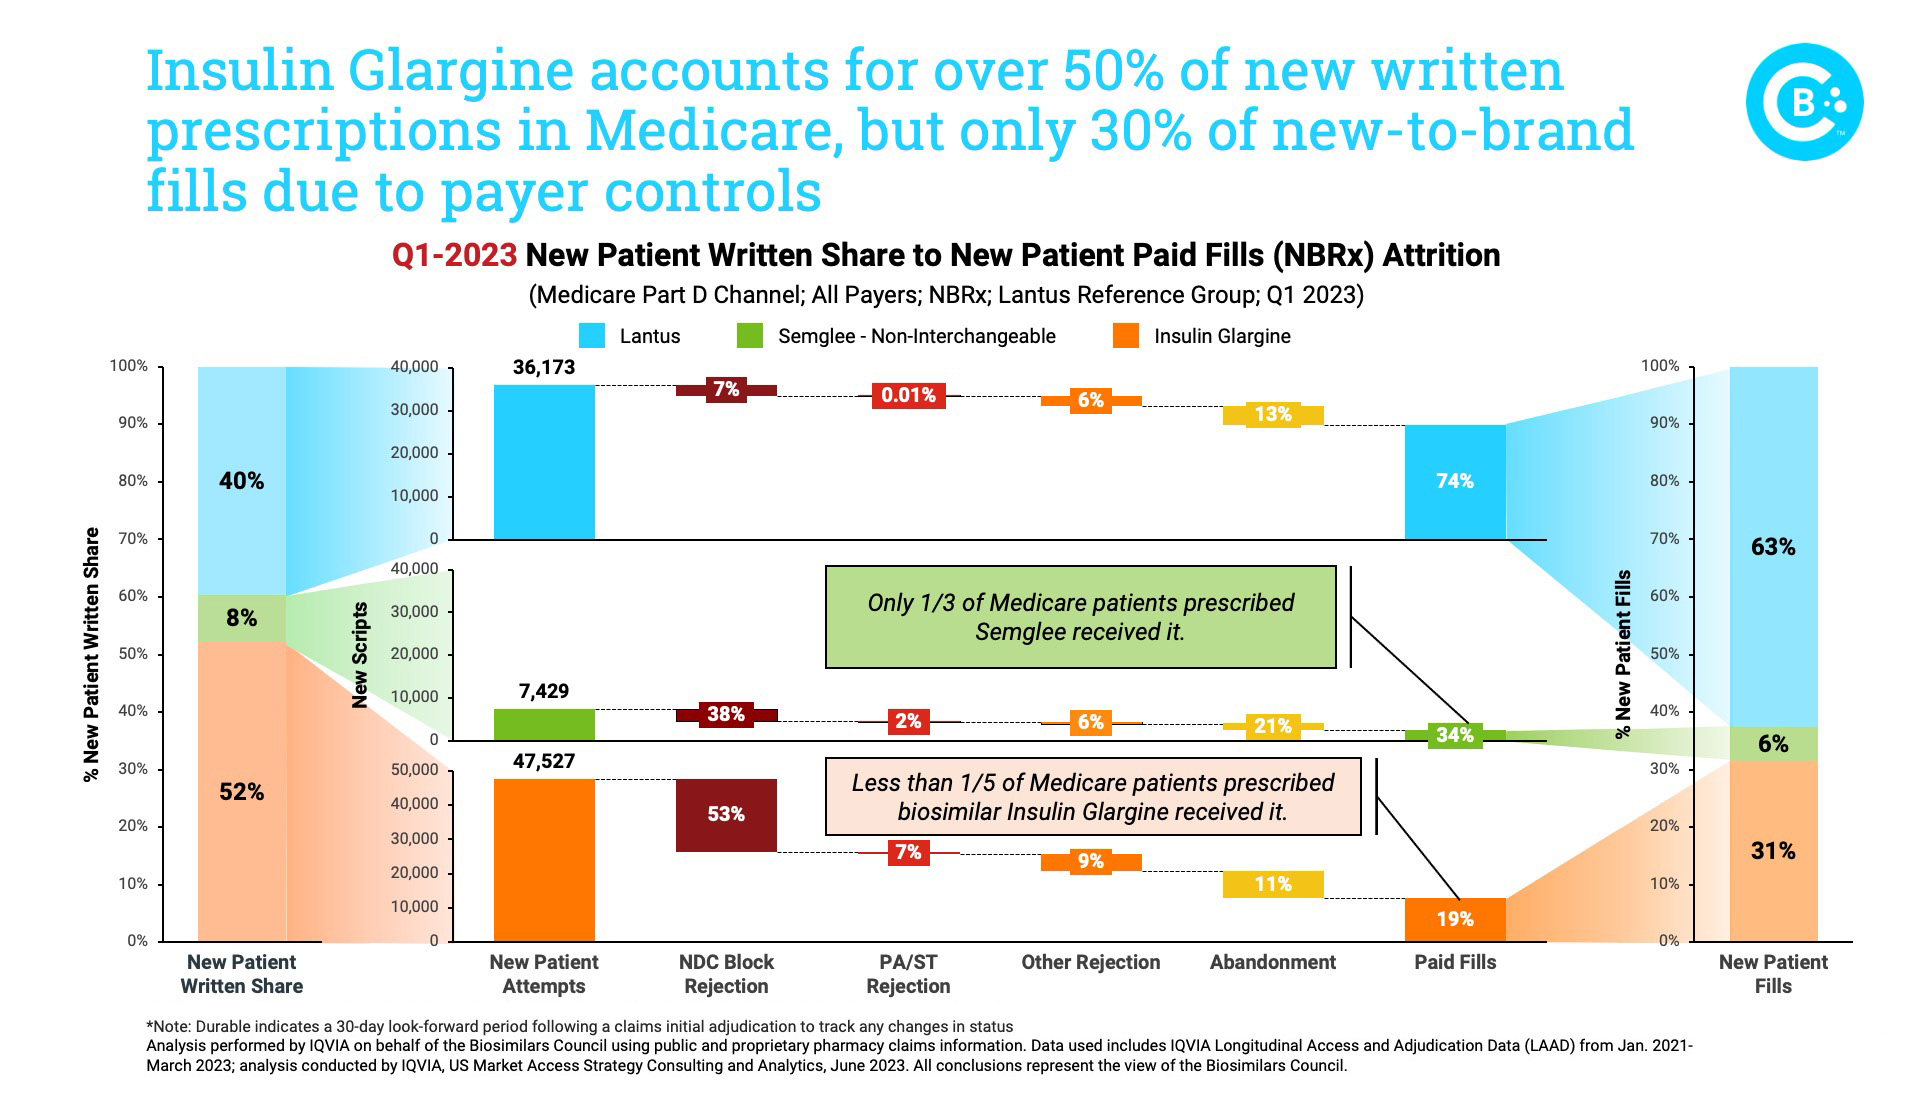 Insulin Glargine accounts for over 50% of new written prescriptions in Medicare, but only 30% of new-to-brand fills due to payer controls